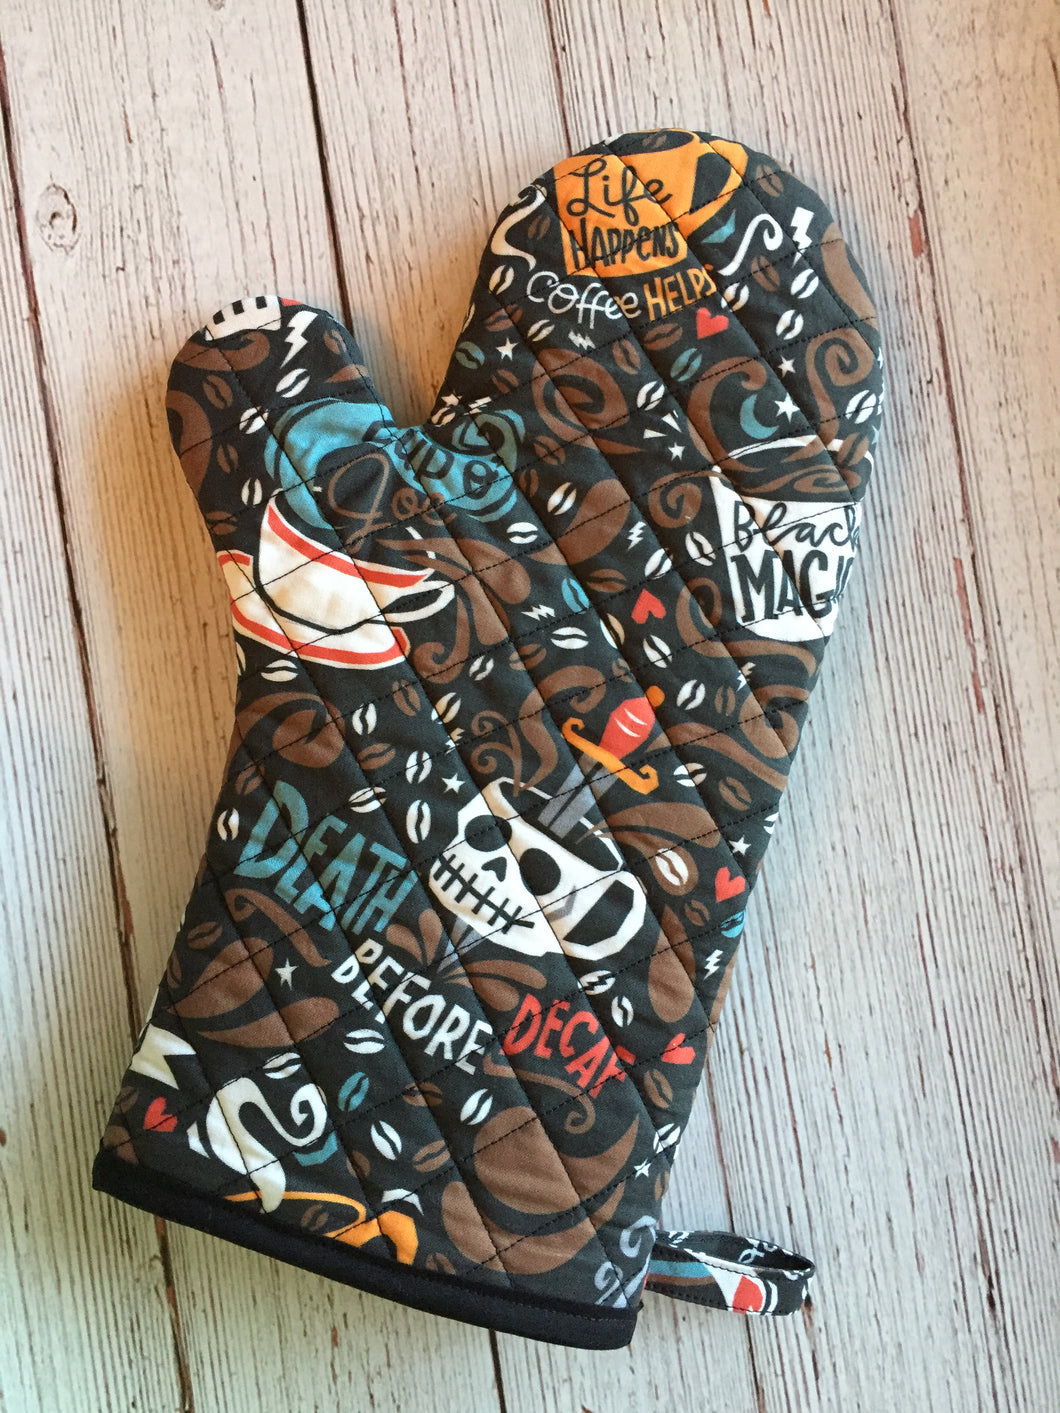 Oven Mitt - One Oven Mitt Made With Coffee Inspired Fabric - Death Before Decaf - Cup O' Joe - Espresso Yourself